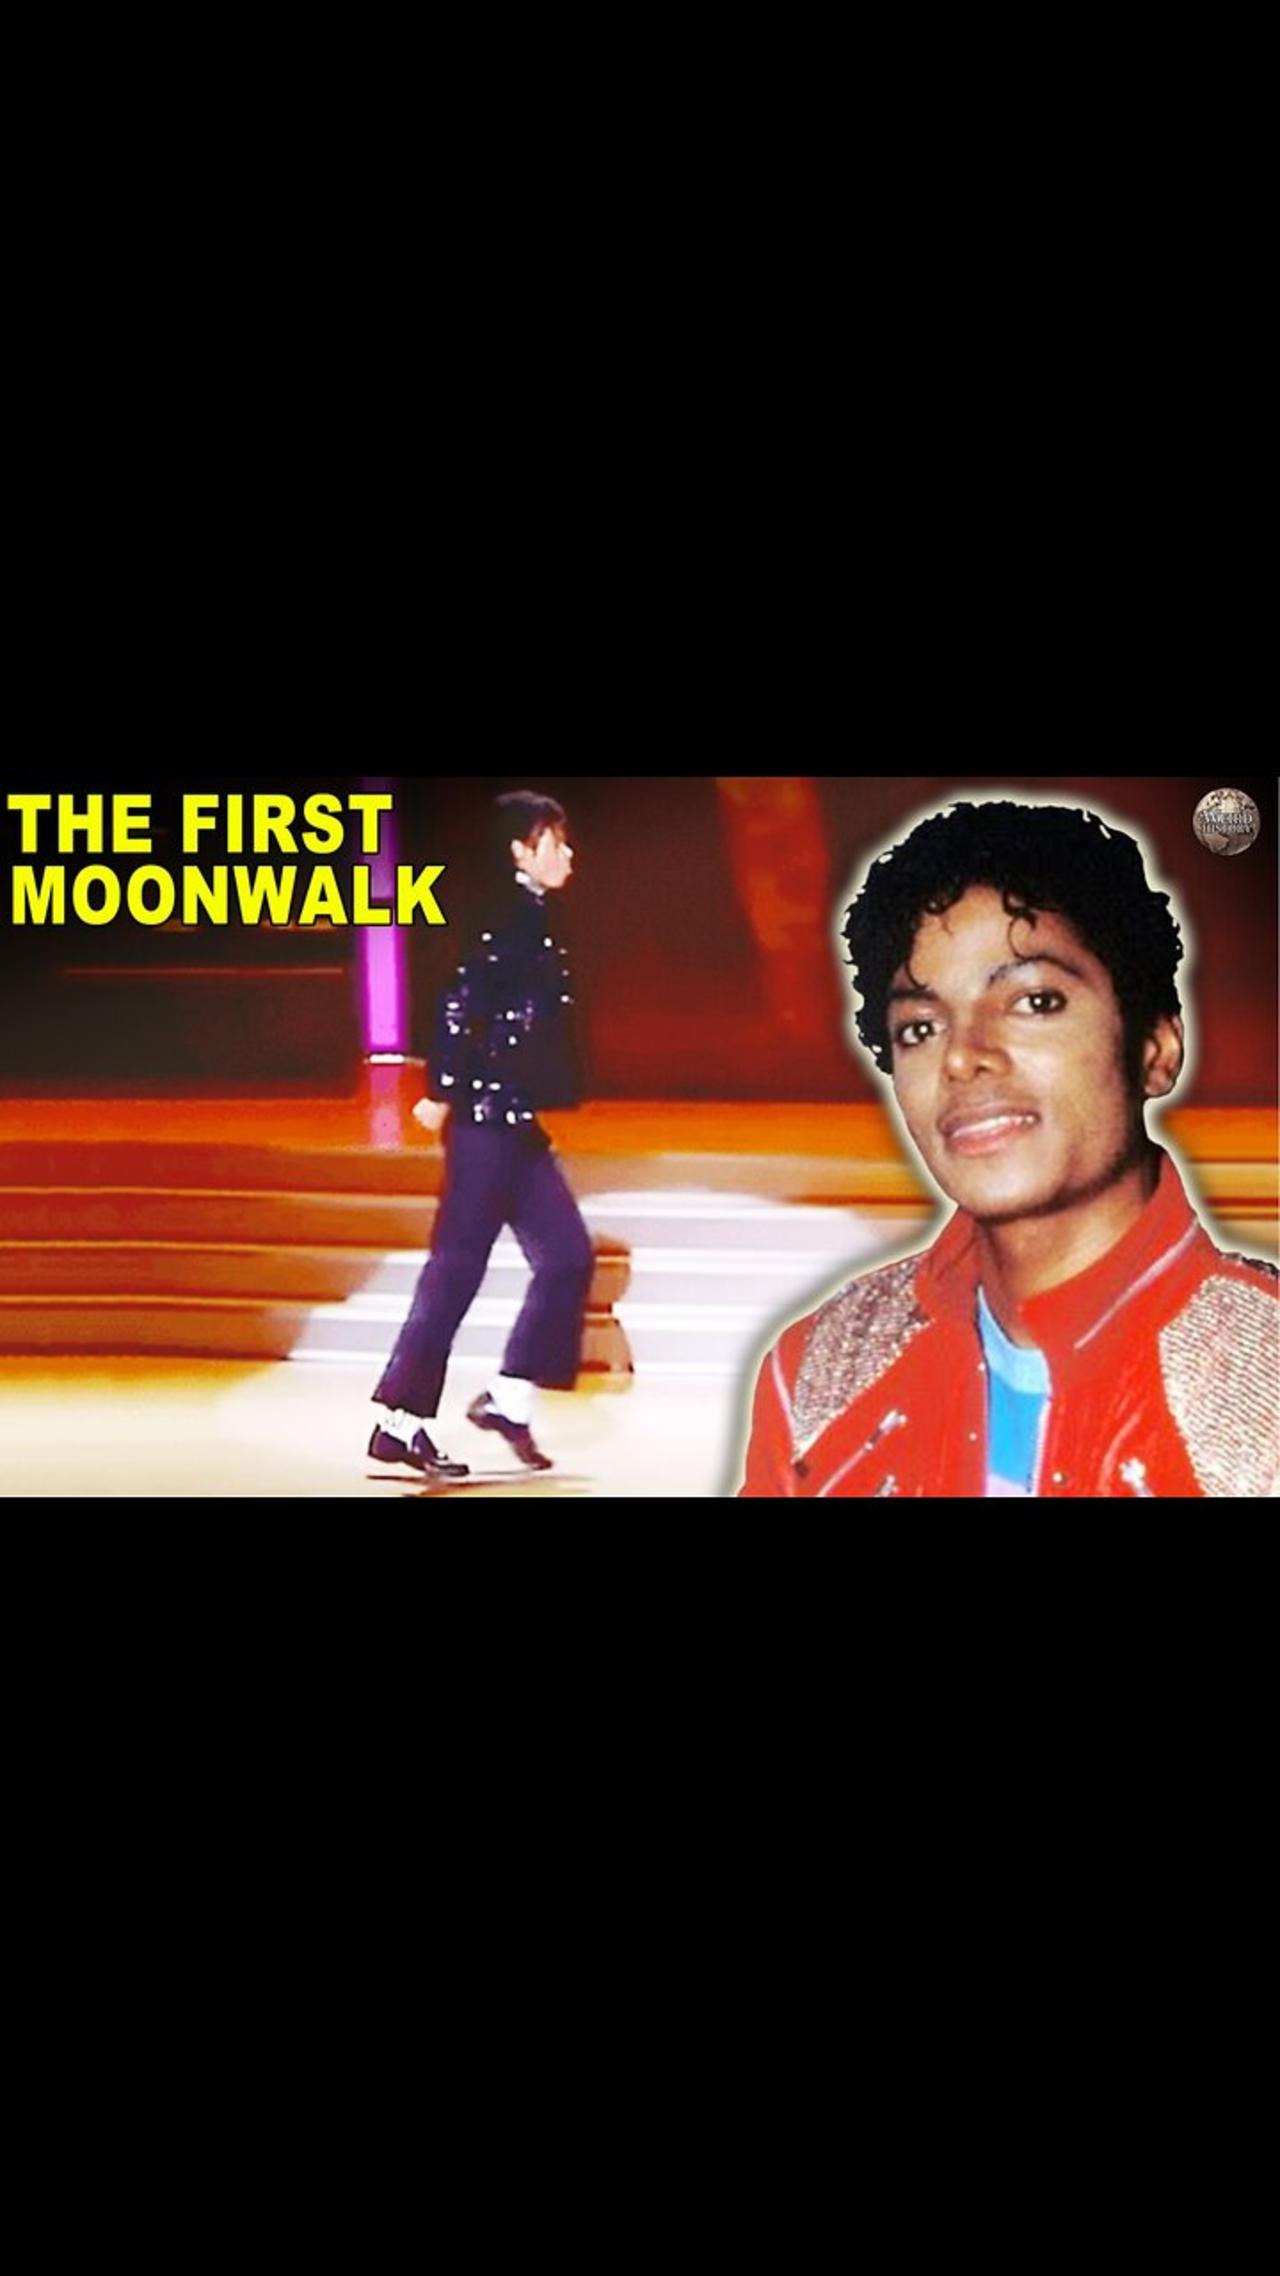 The first moonwalk of Michael Jackson and all about it. What happened?